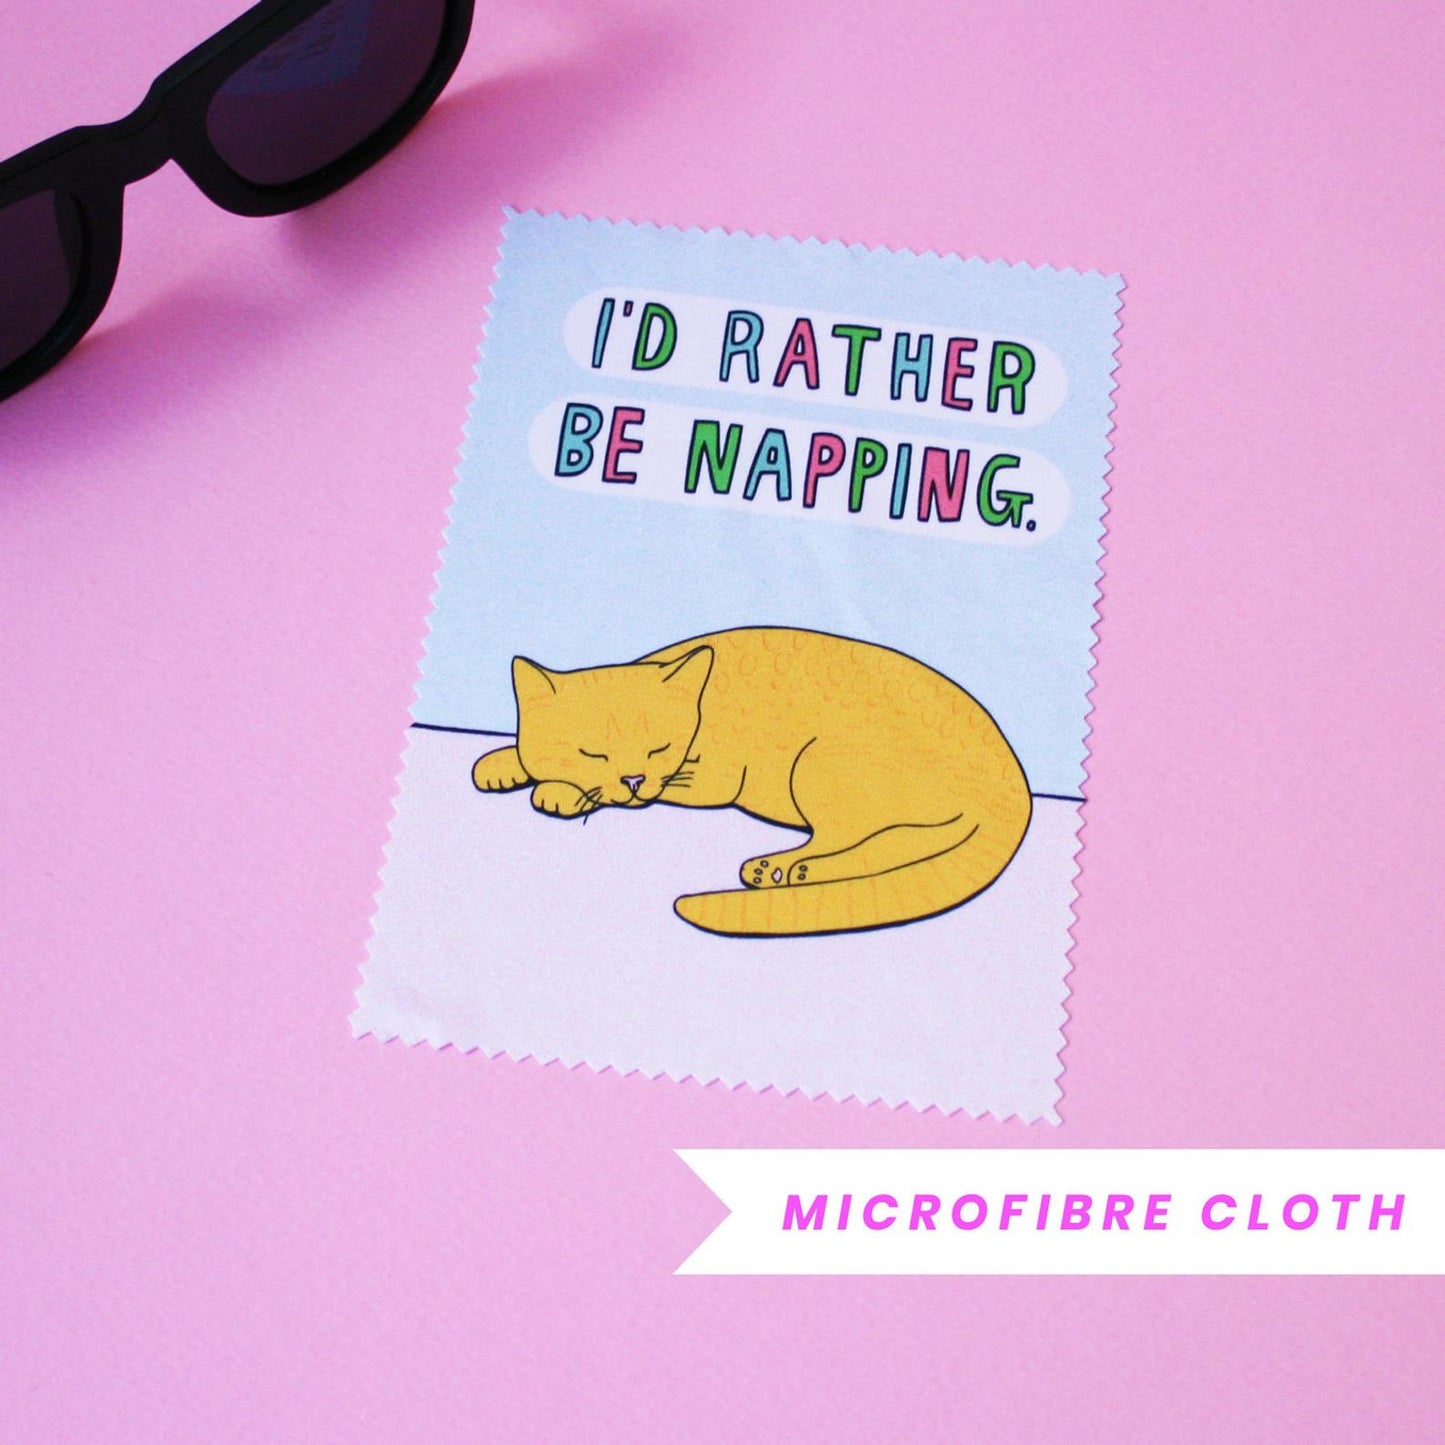 Able and Game Microfibre Cloth I'd rather be Napping